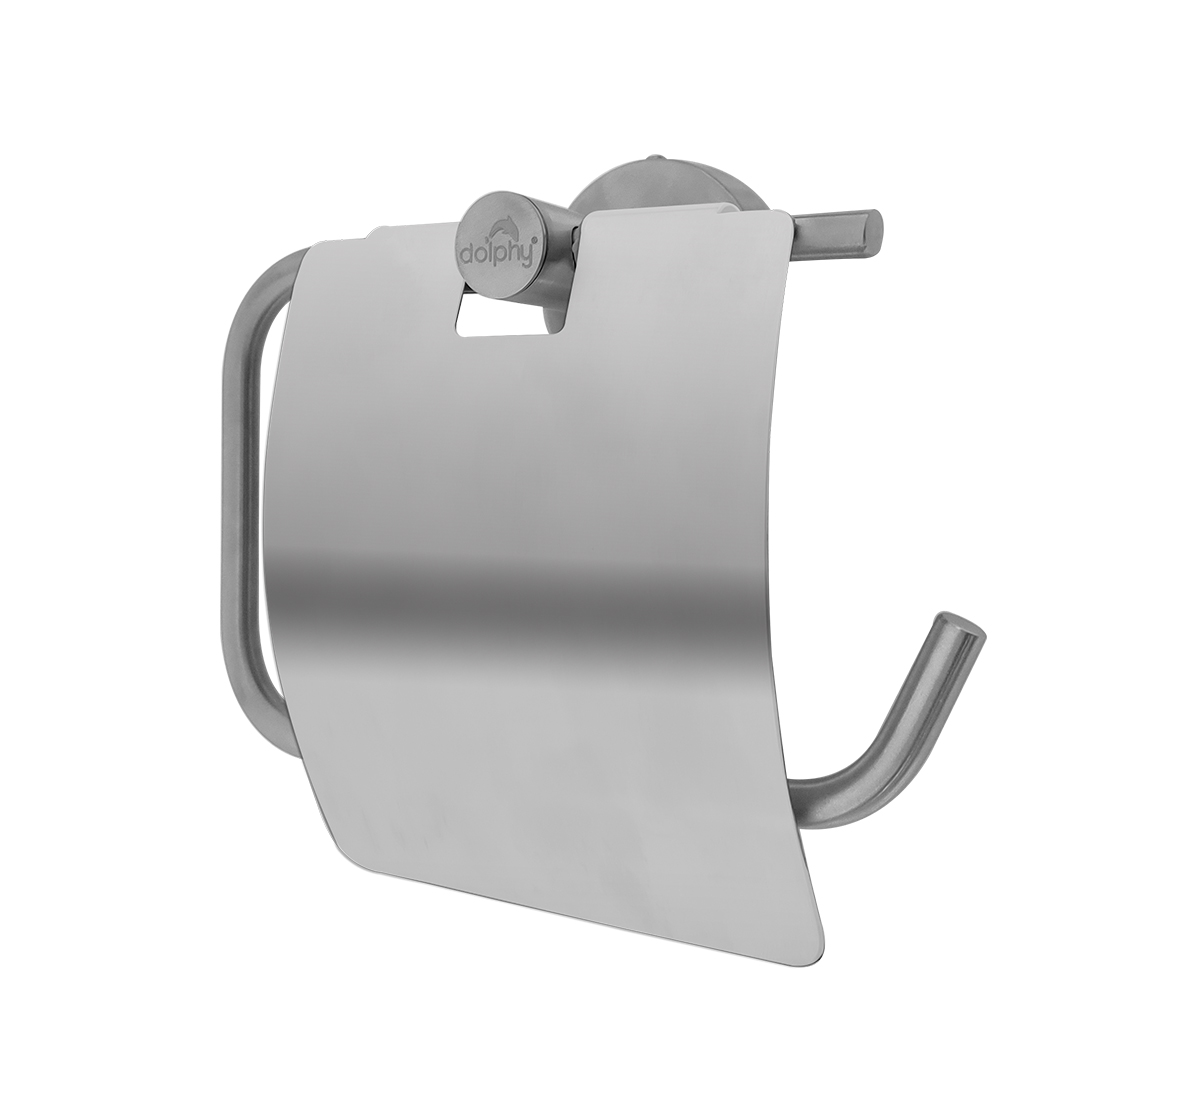 Silver Toilet Paper Dispenser wall mounted